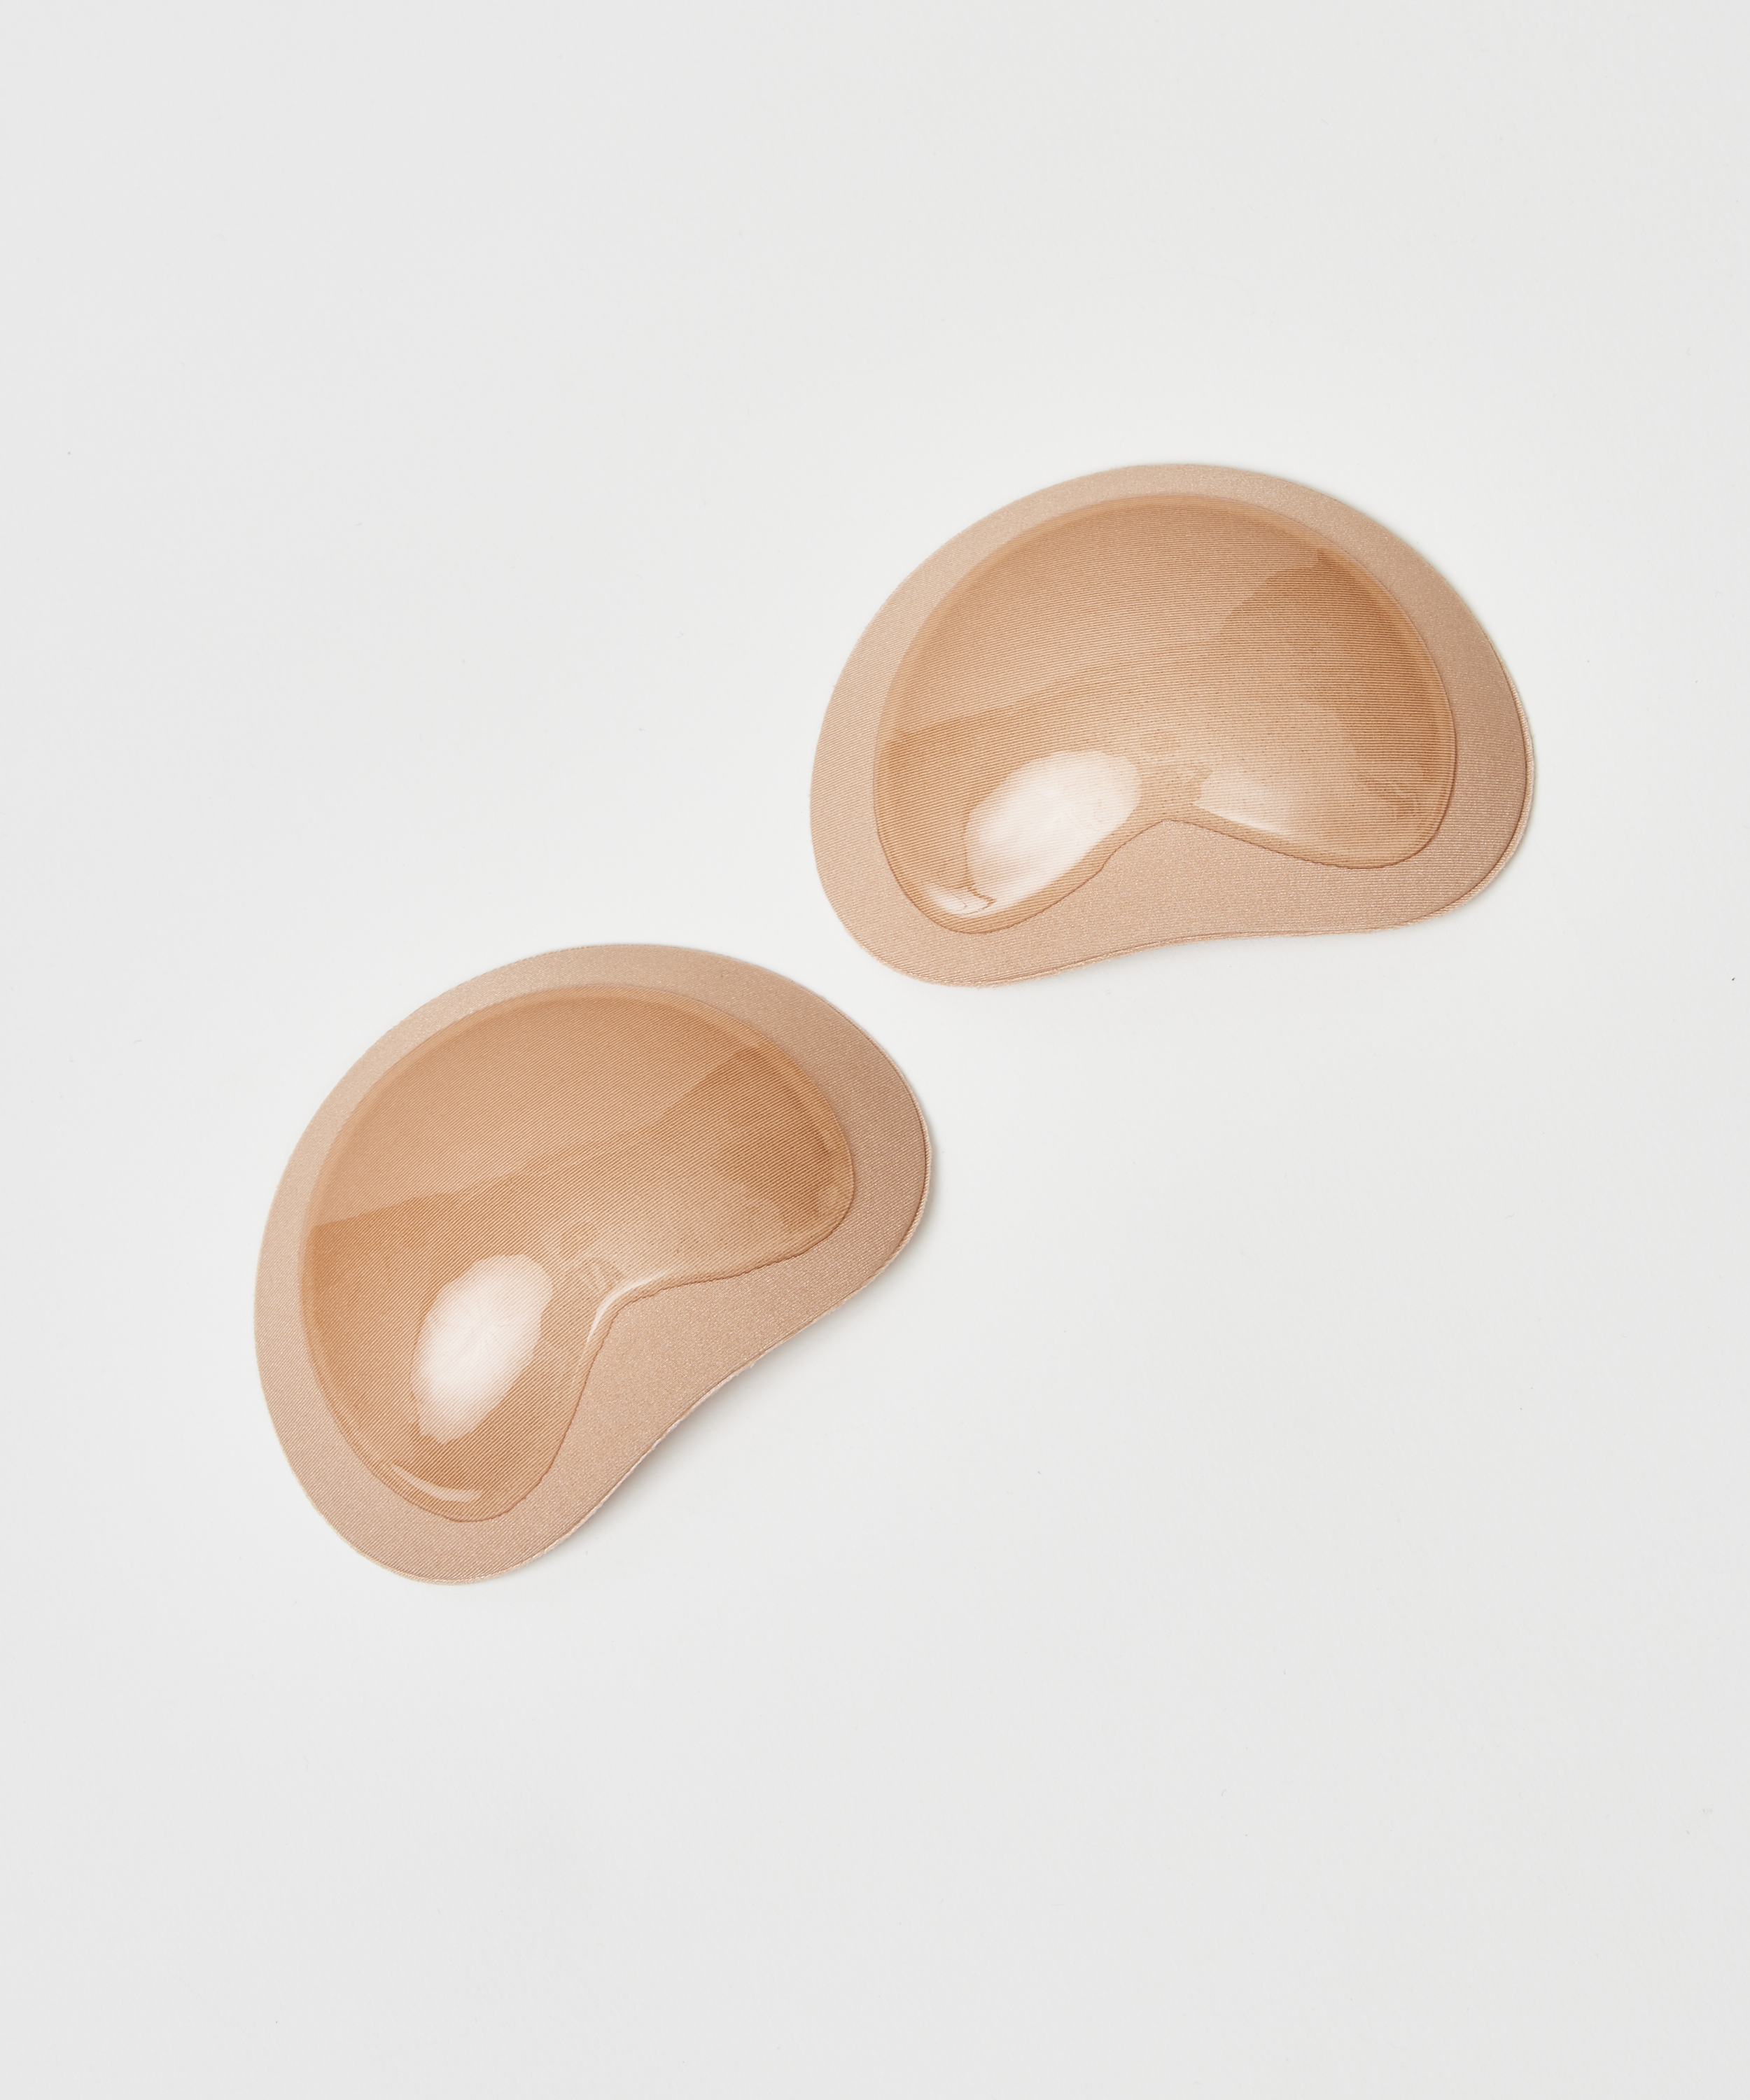 Stick on push up pads voor €14.99 - Bh Accessoires - Hunkemöller